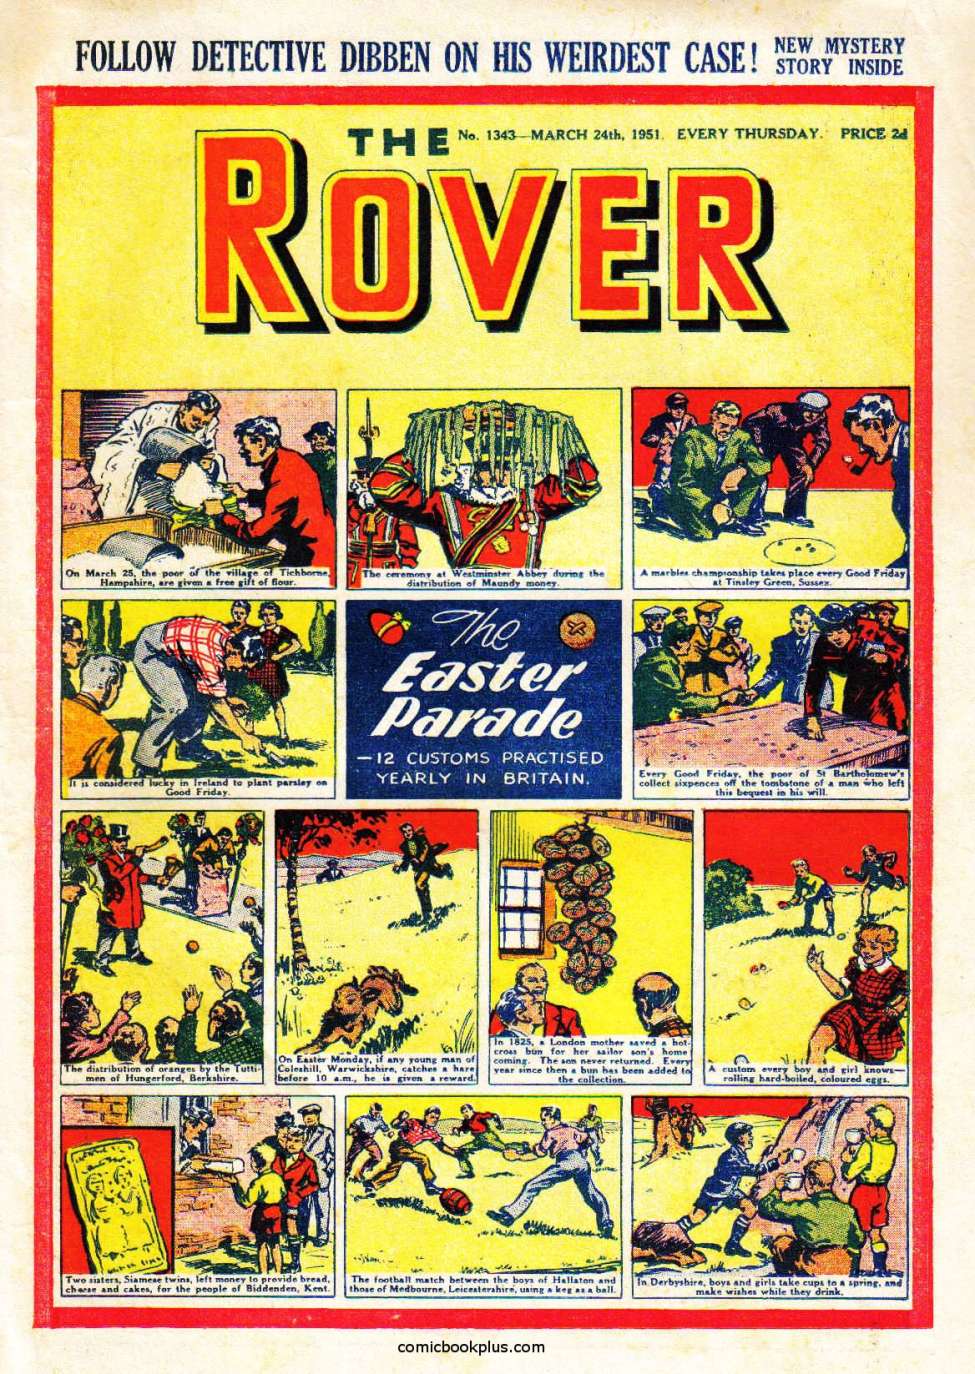 Book Cover For The Rover 1343